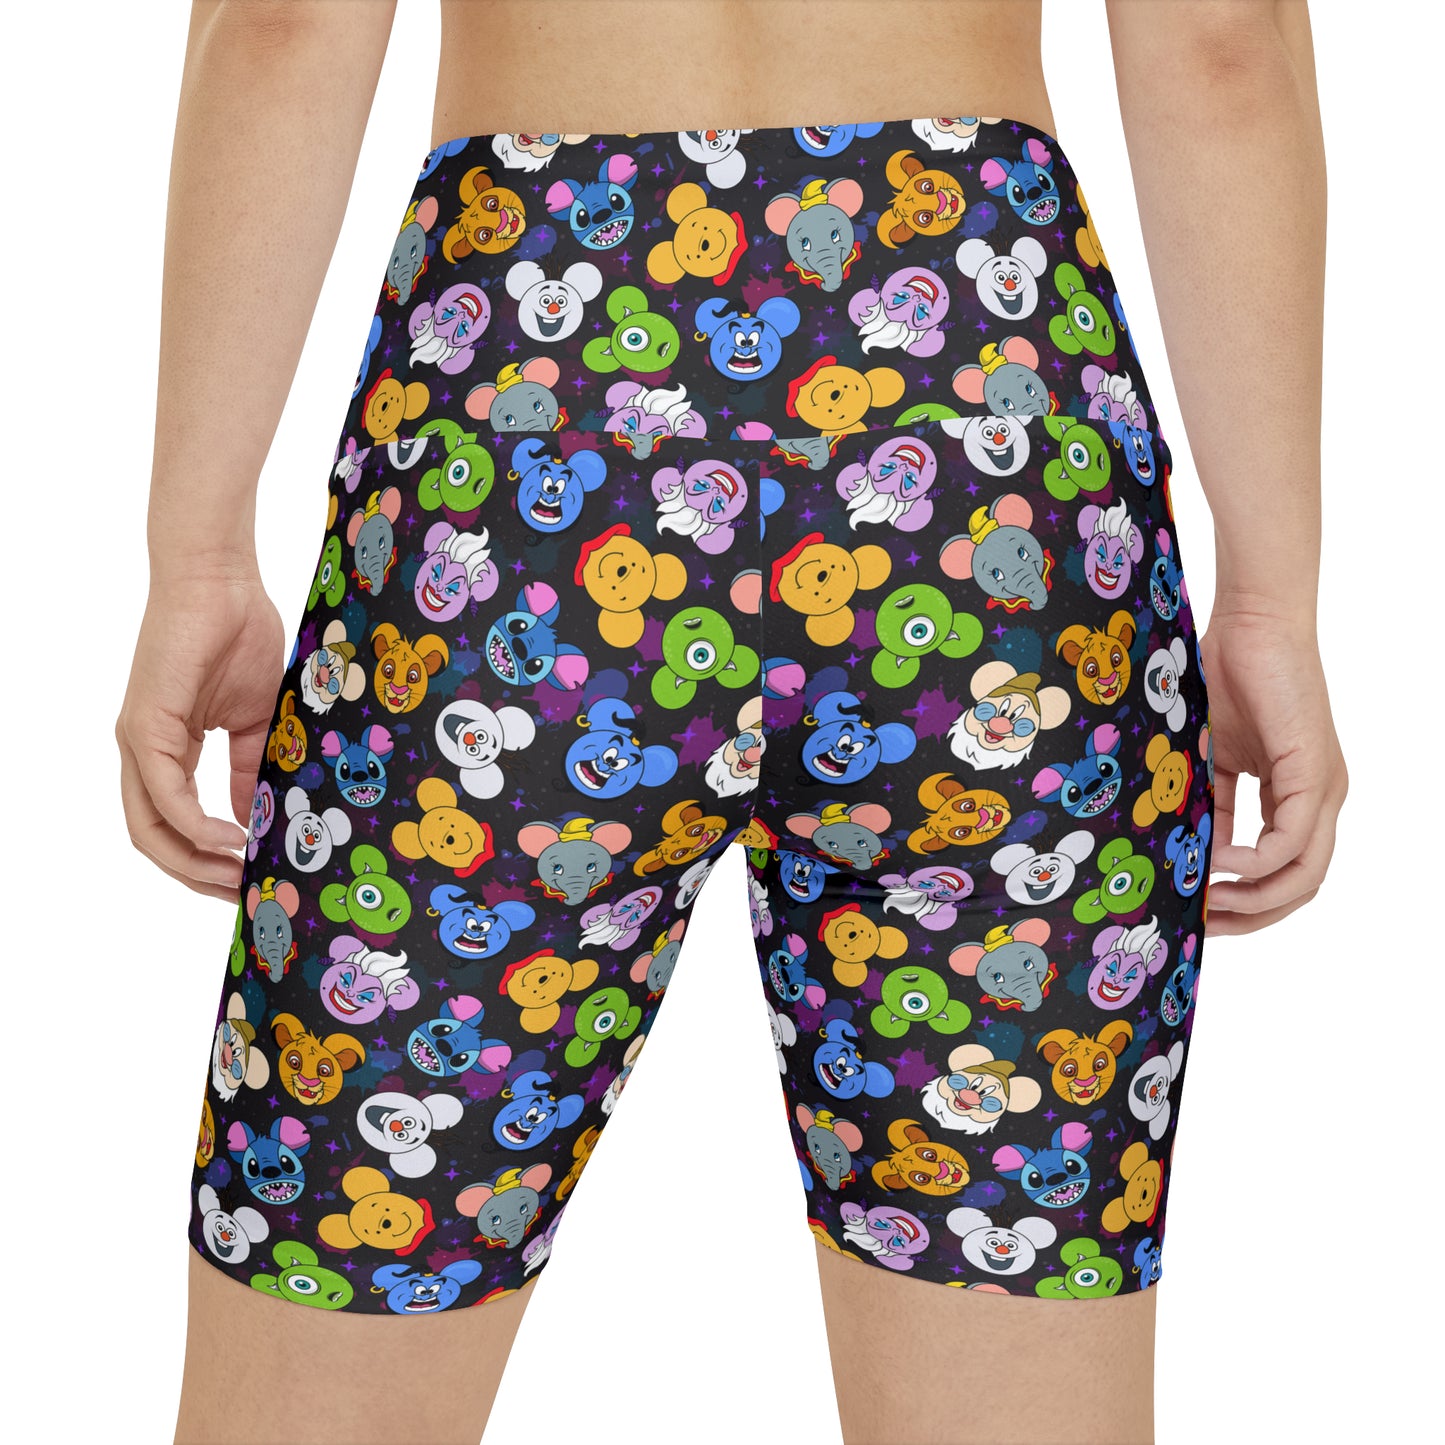 The Magical Gang Women's Athletic Workout Shorts